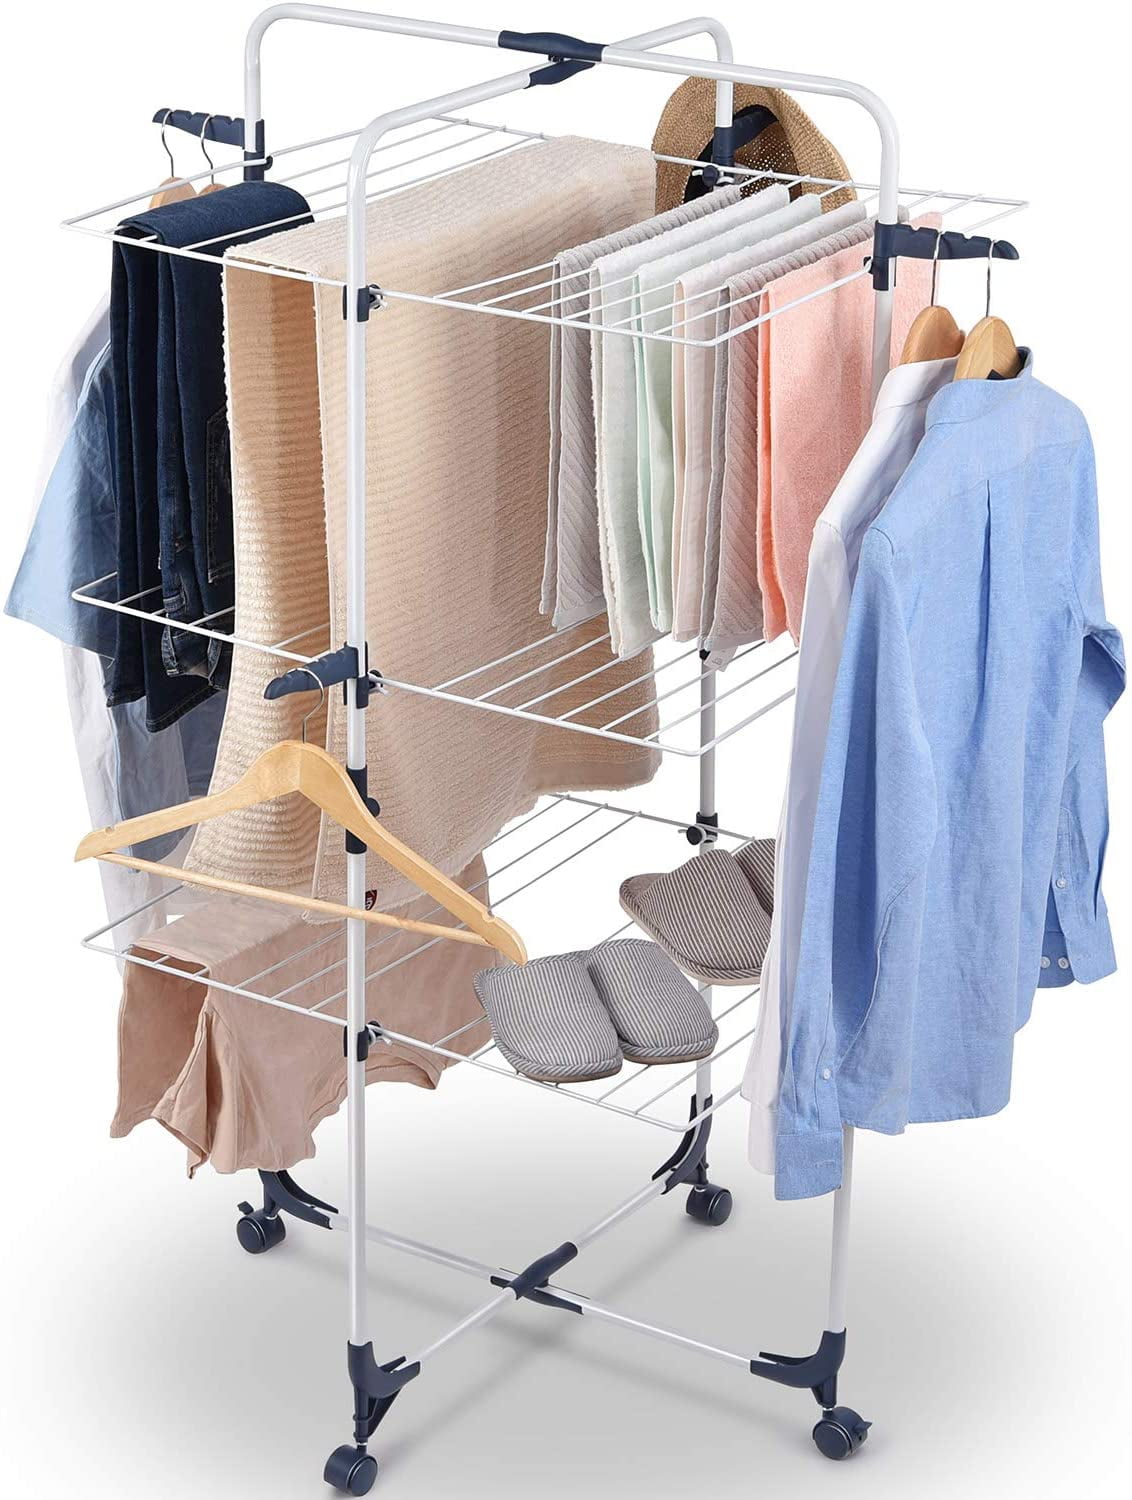 Clothes Airer 3 Tier Laundry Dryer Folding Indoor & Outdoor Horse Drying Rack 